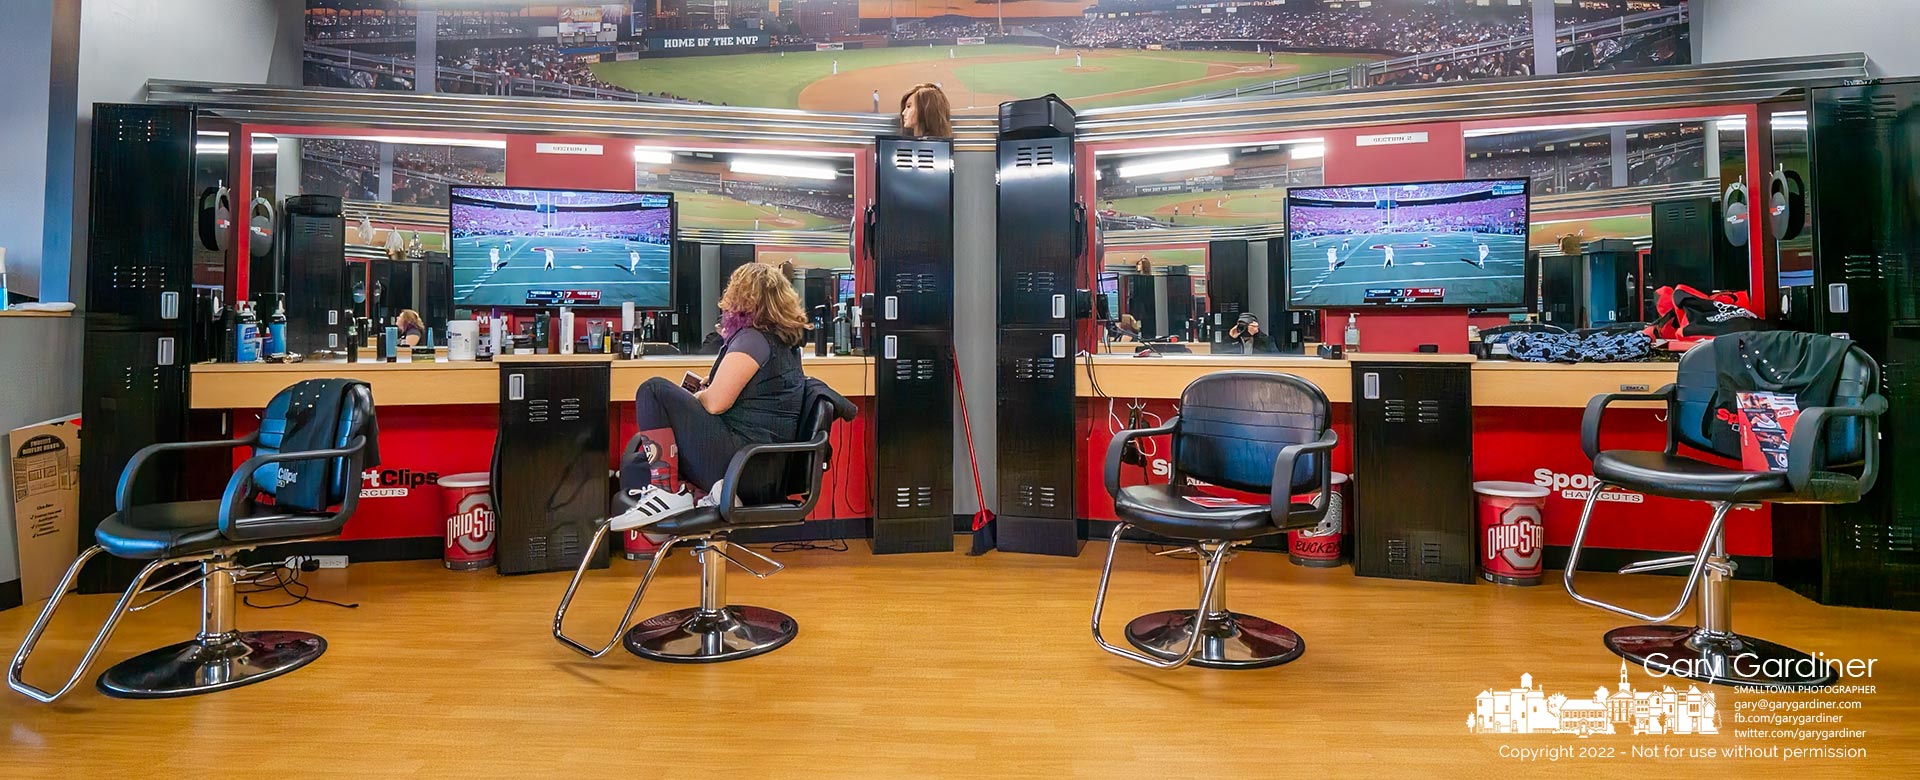 A beautician sits in her work chair watching the Ohio State-Michigan football game as one of the people in Westerville who could only watch the game while they worked. My Final Photo for November 26, 2022.